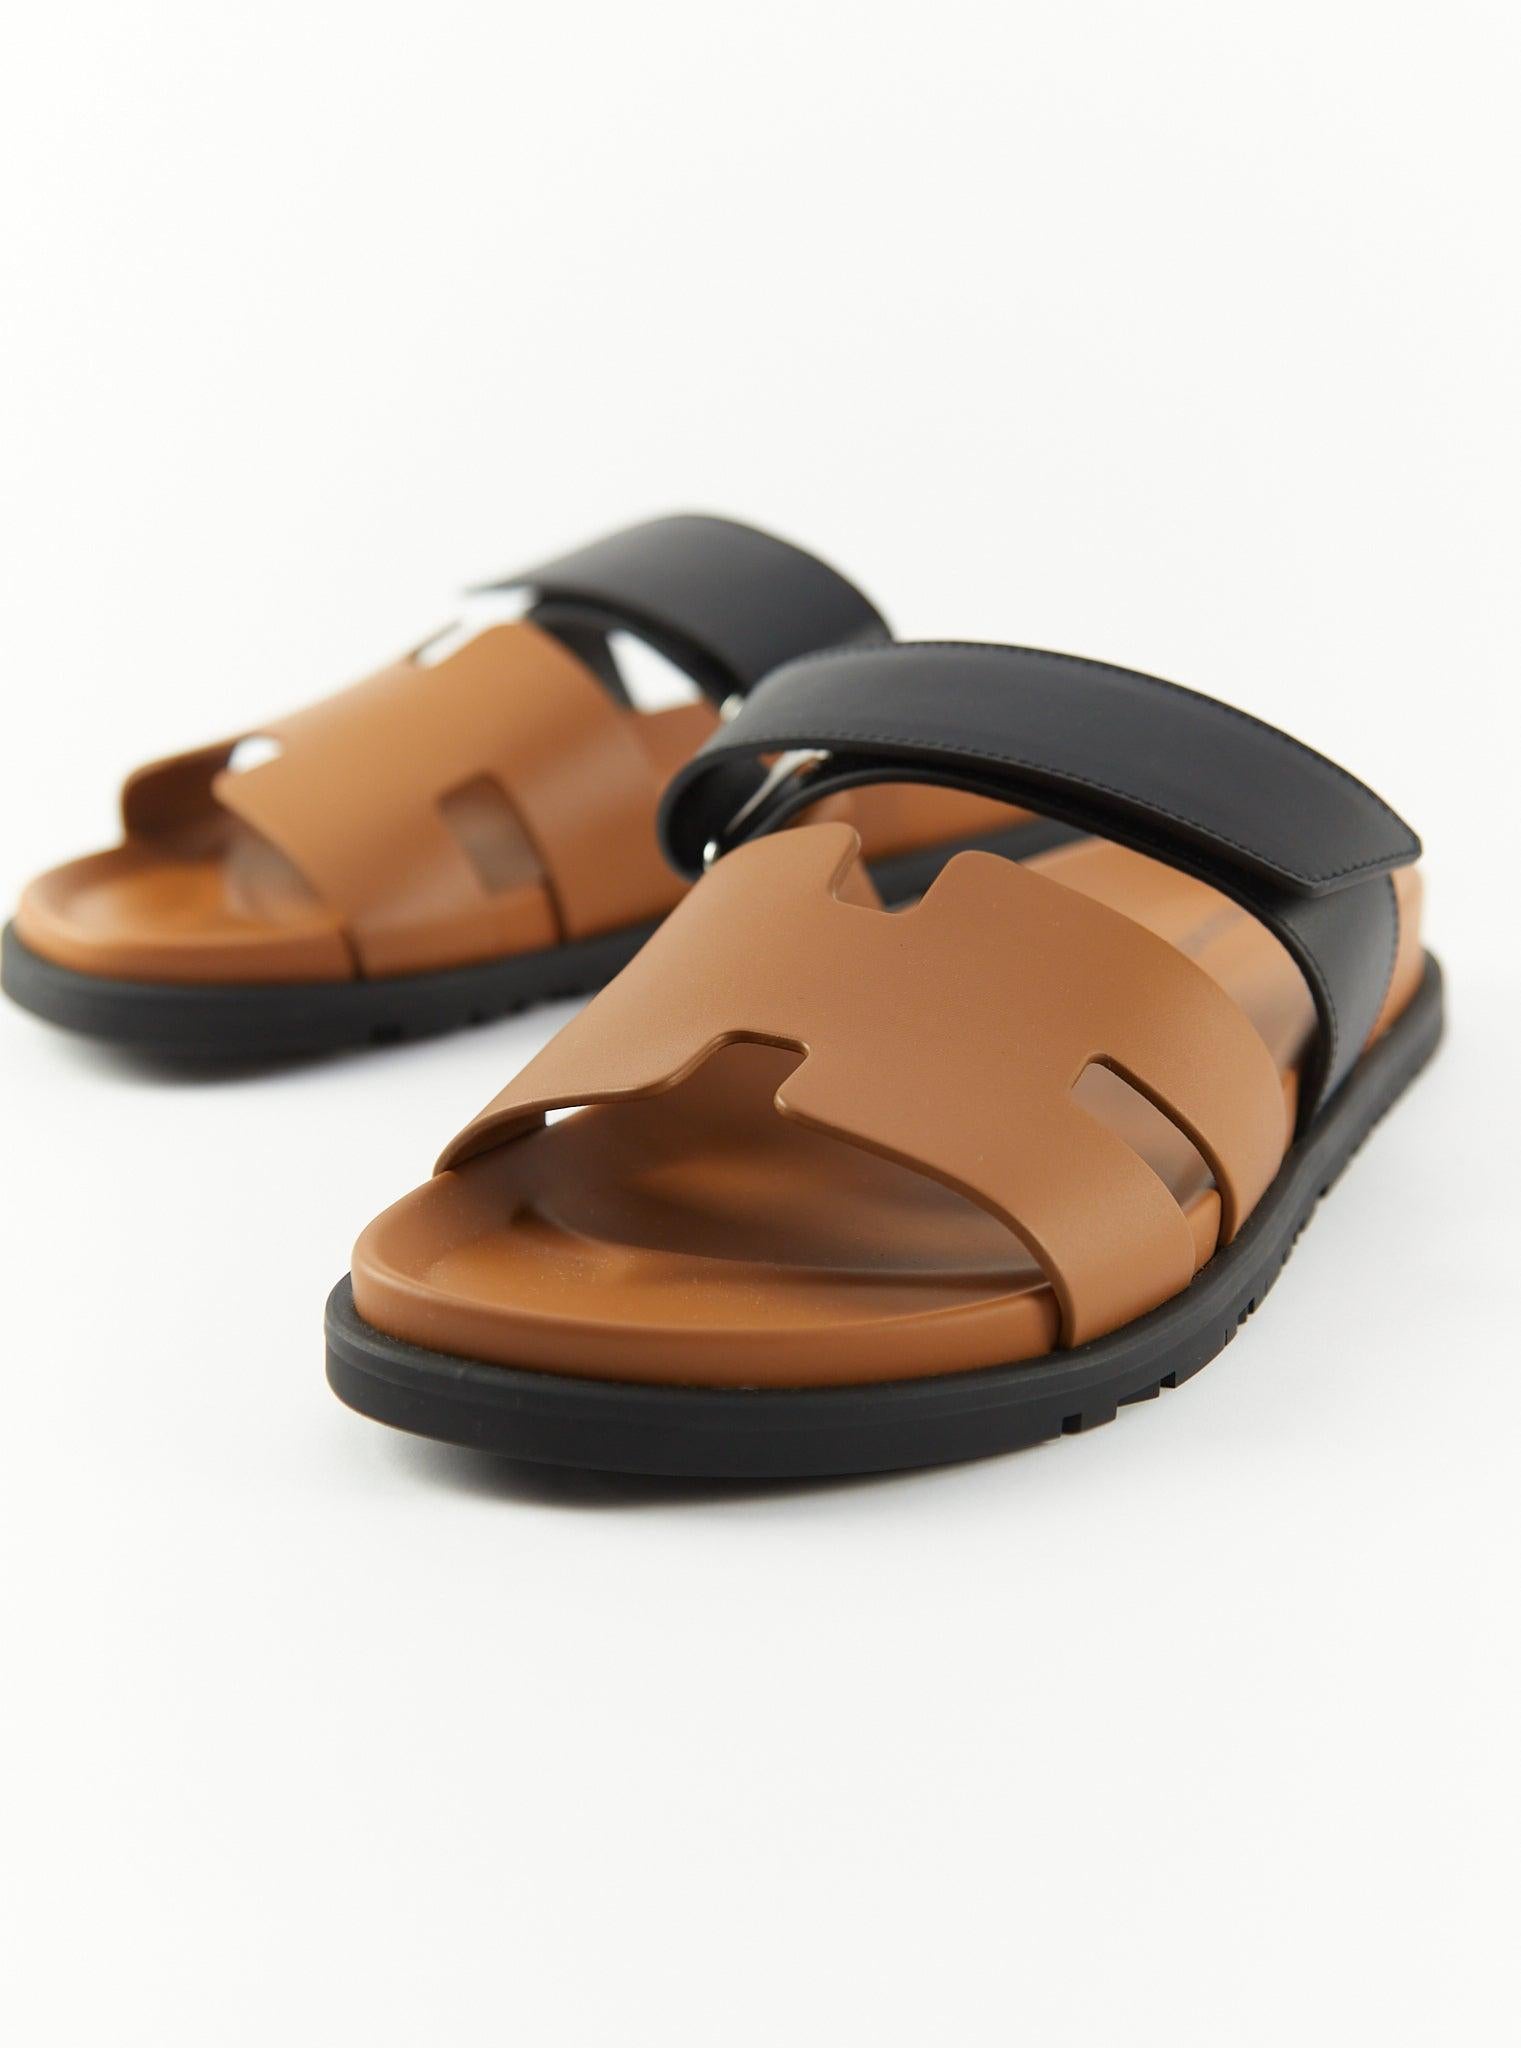 Hermès Techno-sandal in calfskin with rubber sole and adjustable strap

Black and Gold Calfskin Leather 

Accompanied by: Hermès box, dust bags and ribbon

Men's Size 40